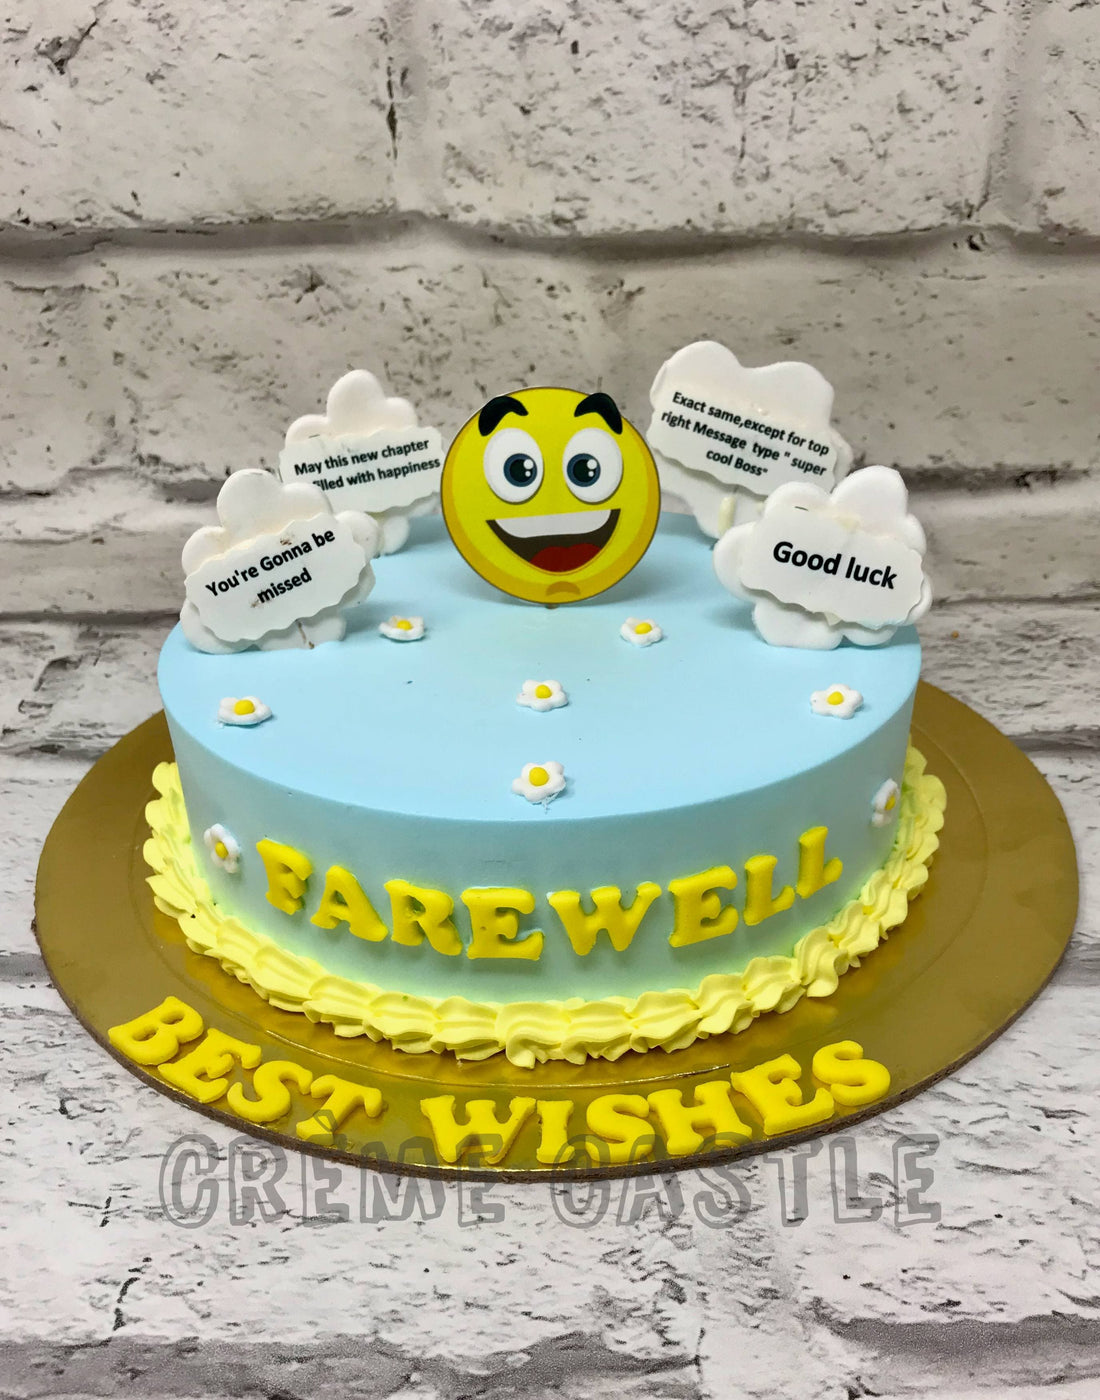 Farwell Theme Cake with Emoticon by Creme Castle